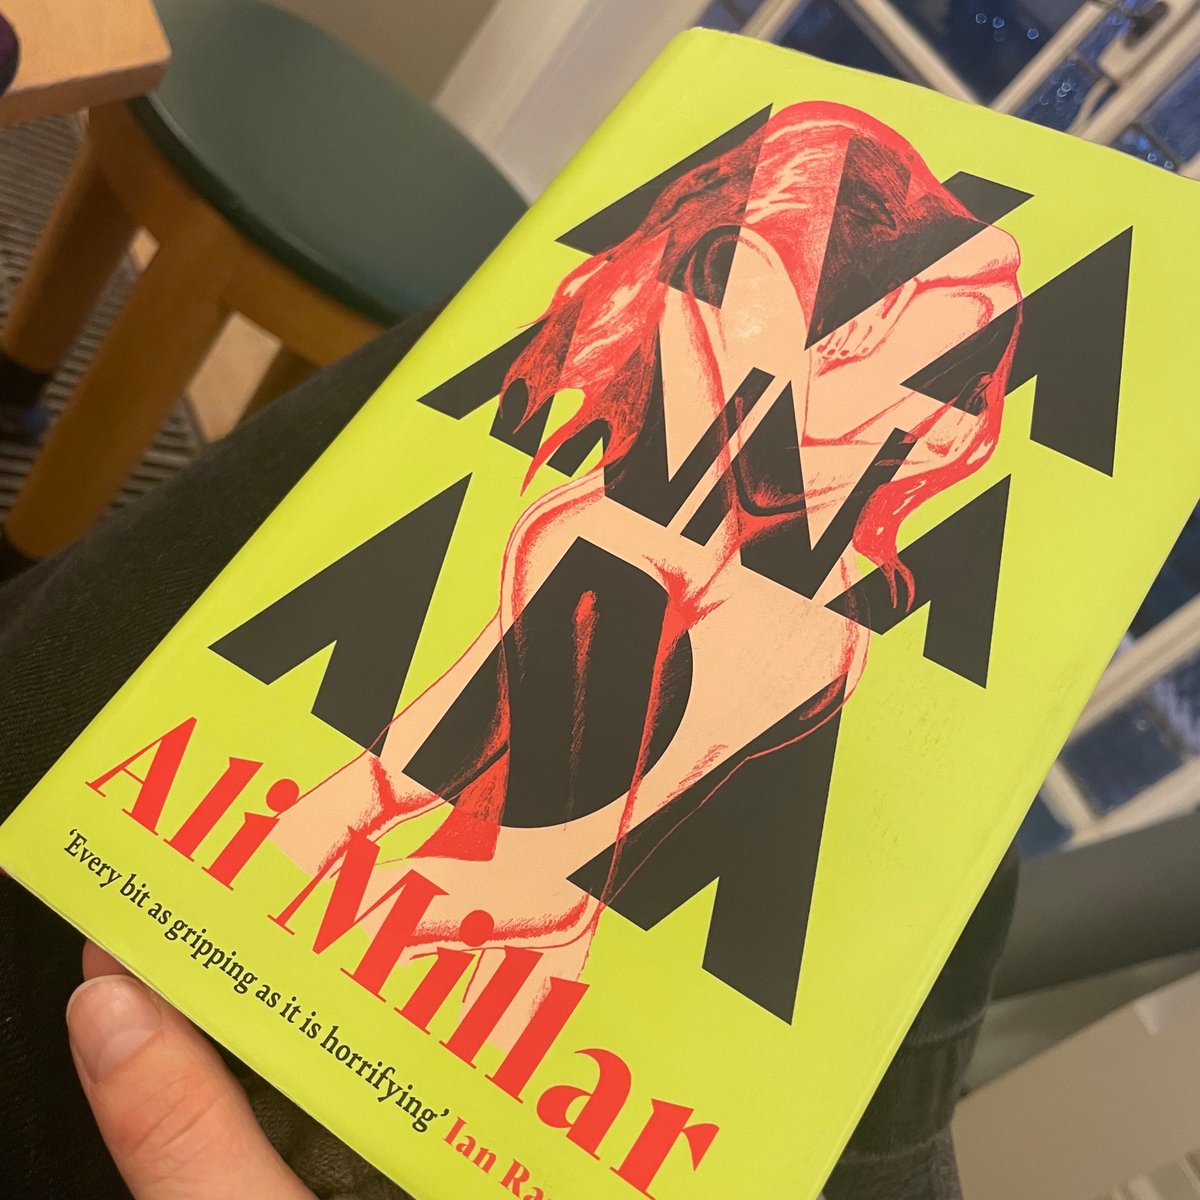 Been waiting a long while to read this rather demented book by @ali_l_millar ~ it’s fairly dark & what the actual fuck. My kind of story ❤️👌#avaannaada